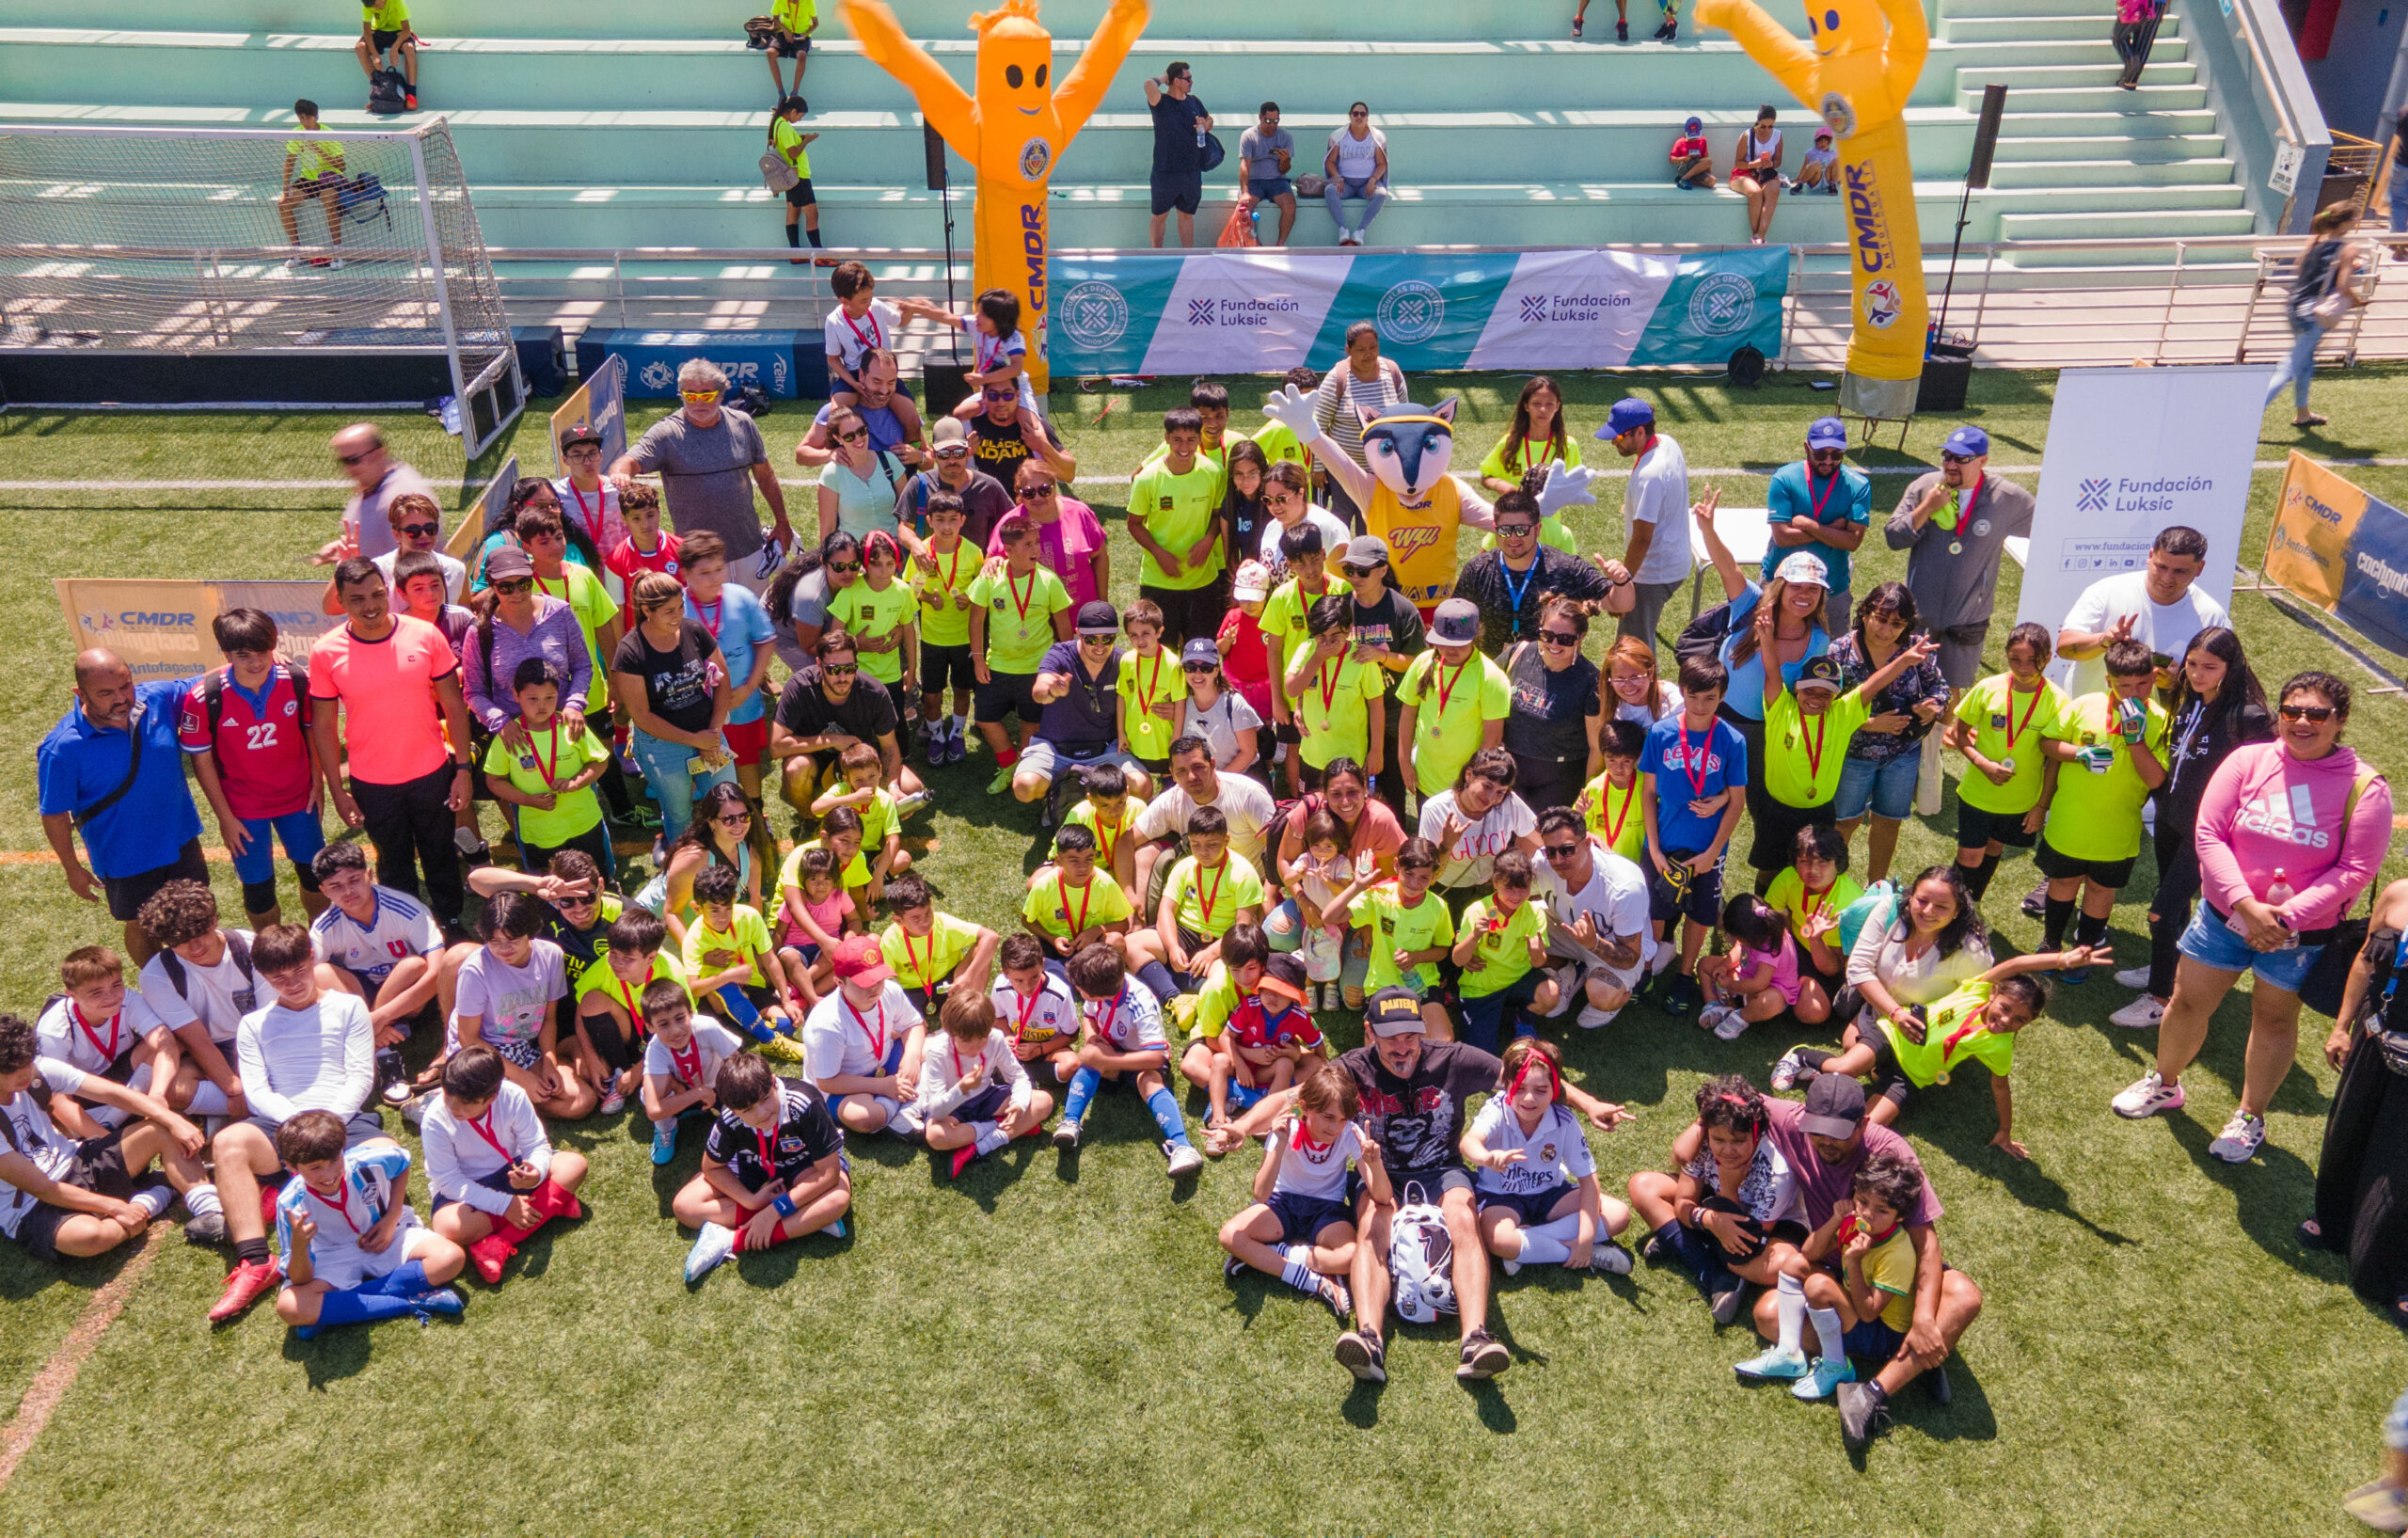 The Luksic Foundation's soccer school opens its doors in Antofagasta for girls and b...